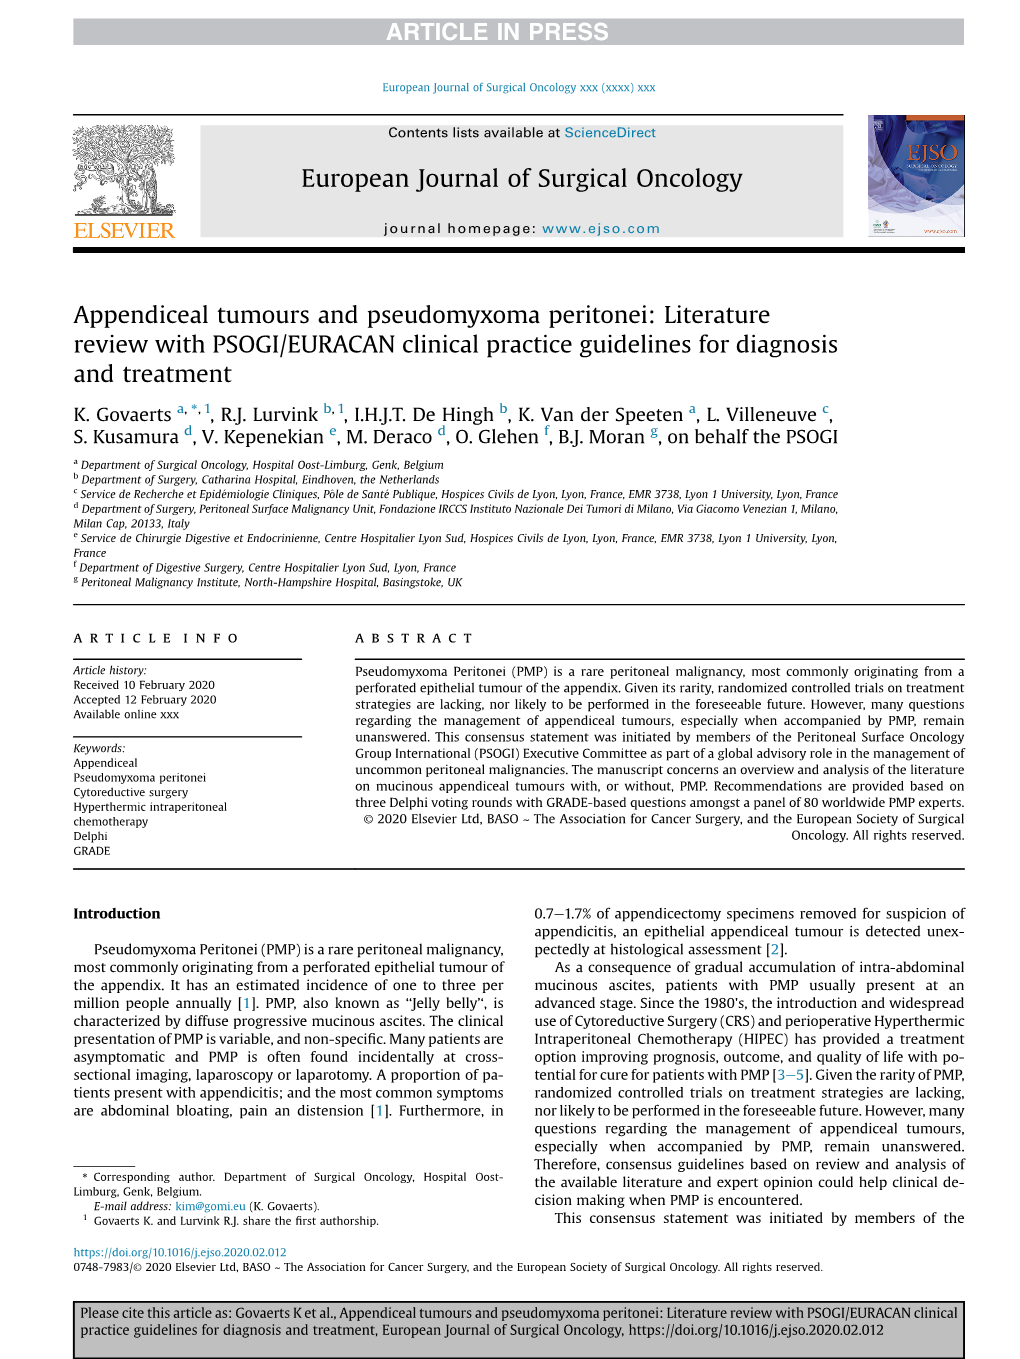 Appendiceal Tumours and Pseudomyxoma Peritonei: Literature Review with PSOGI/EURACAN Clinical Practice Guidelines for Diagnosis and Treatment